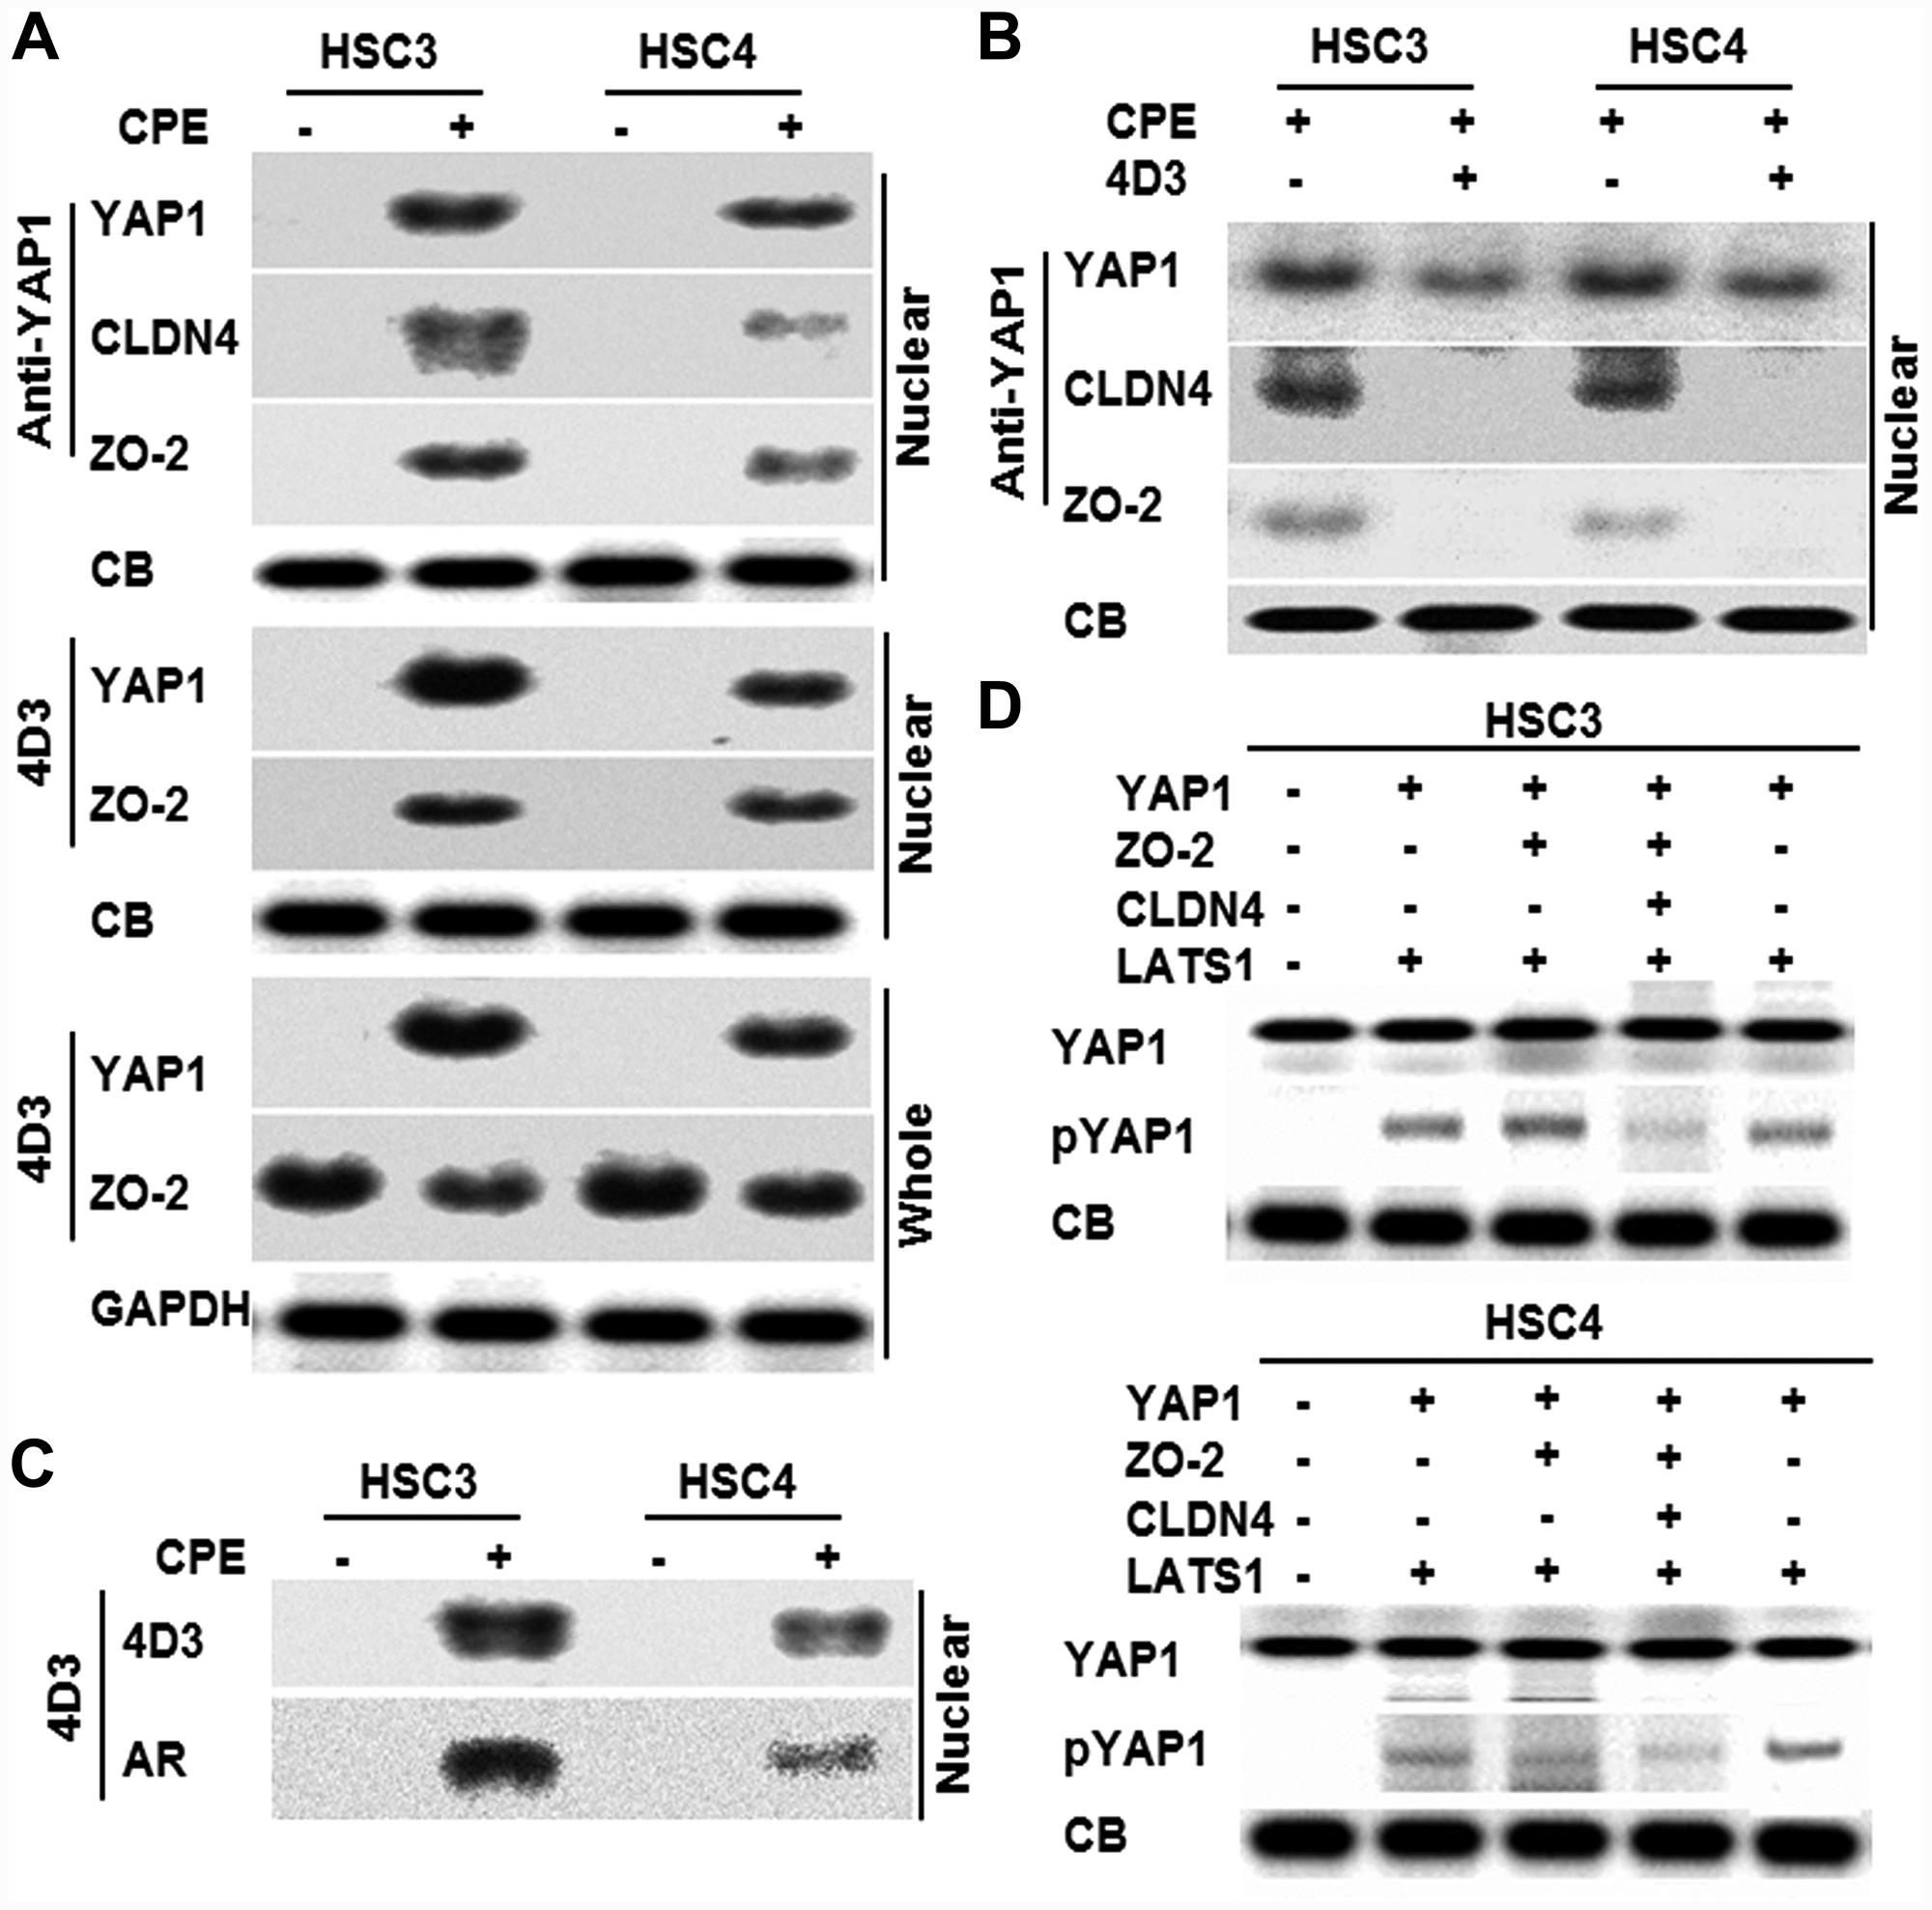 Effect of CPE on interaction of CLDN4 and YAP1 in OSCC cells.